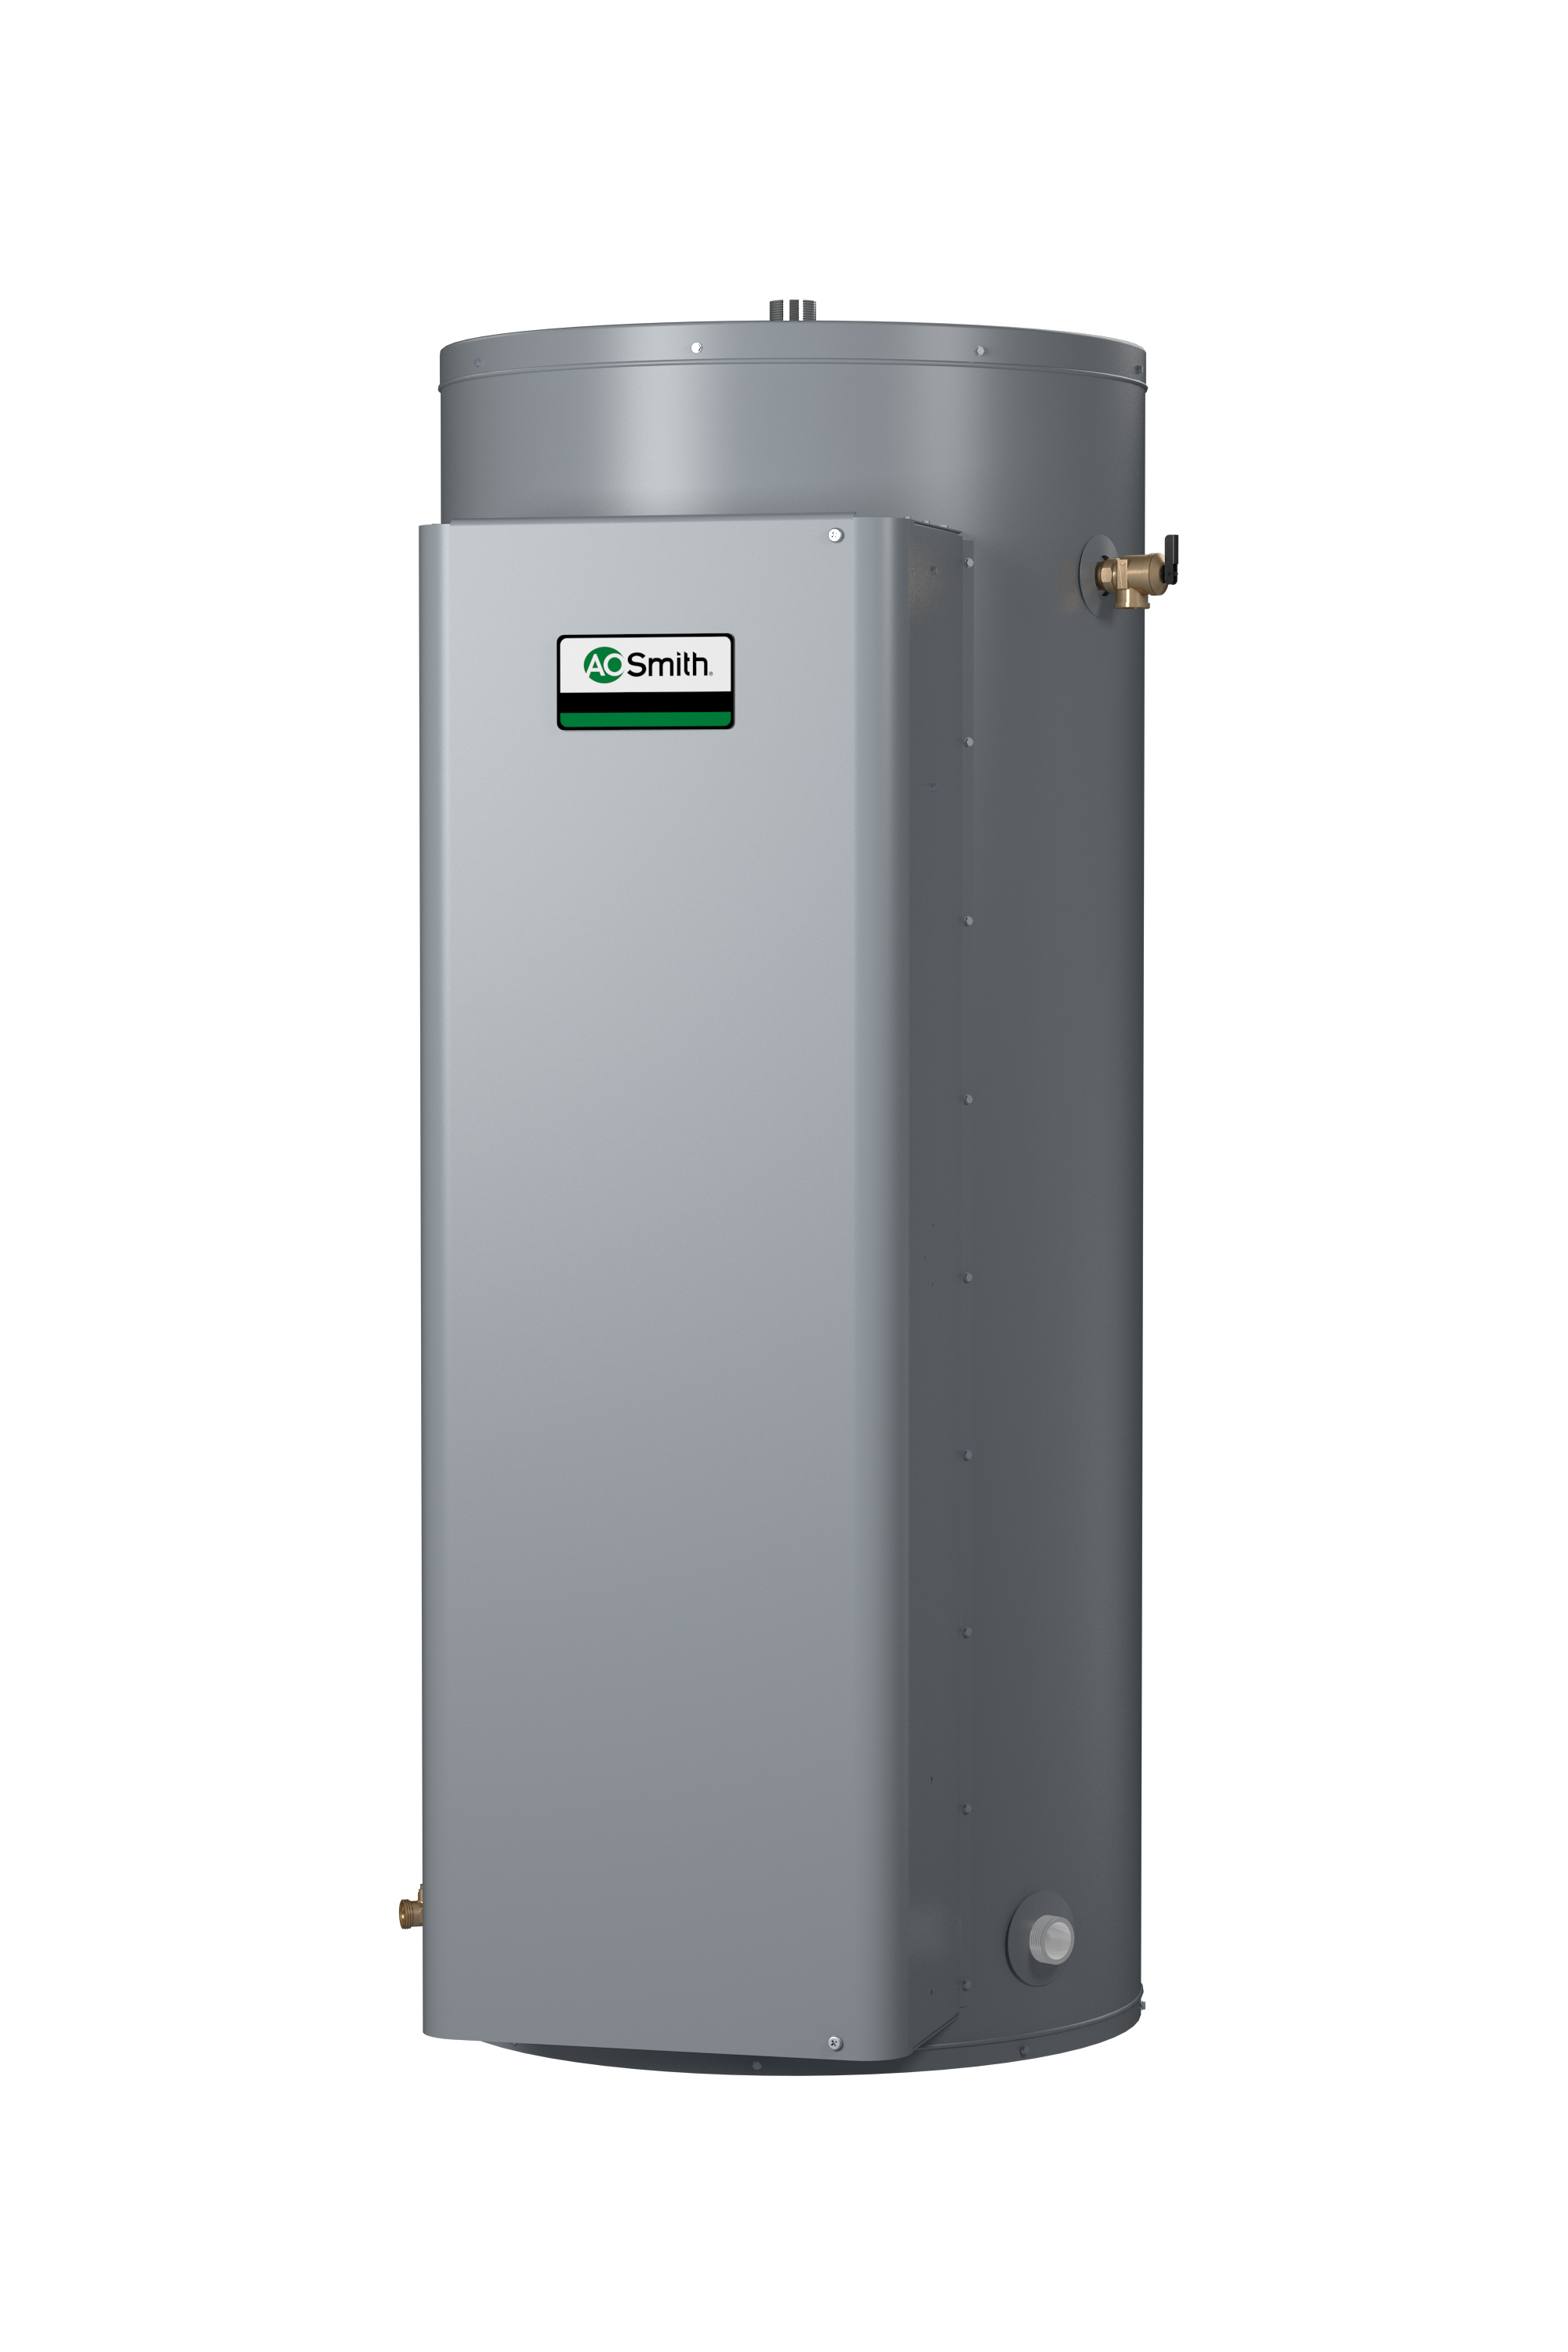 AO SMITH DRE-120-12: 119 GALLON, 12.3KW, 208 VOLT, 33.3 AMPS, 3 PHASE, 3 ELEMENT, COMMERCIAL ELECTRIC WATER HEATER, GOLD SERIES